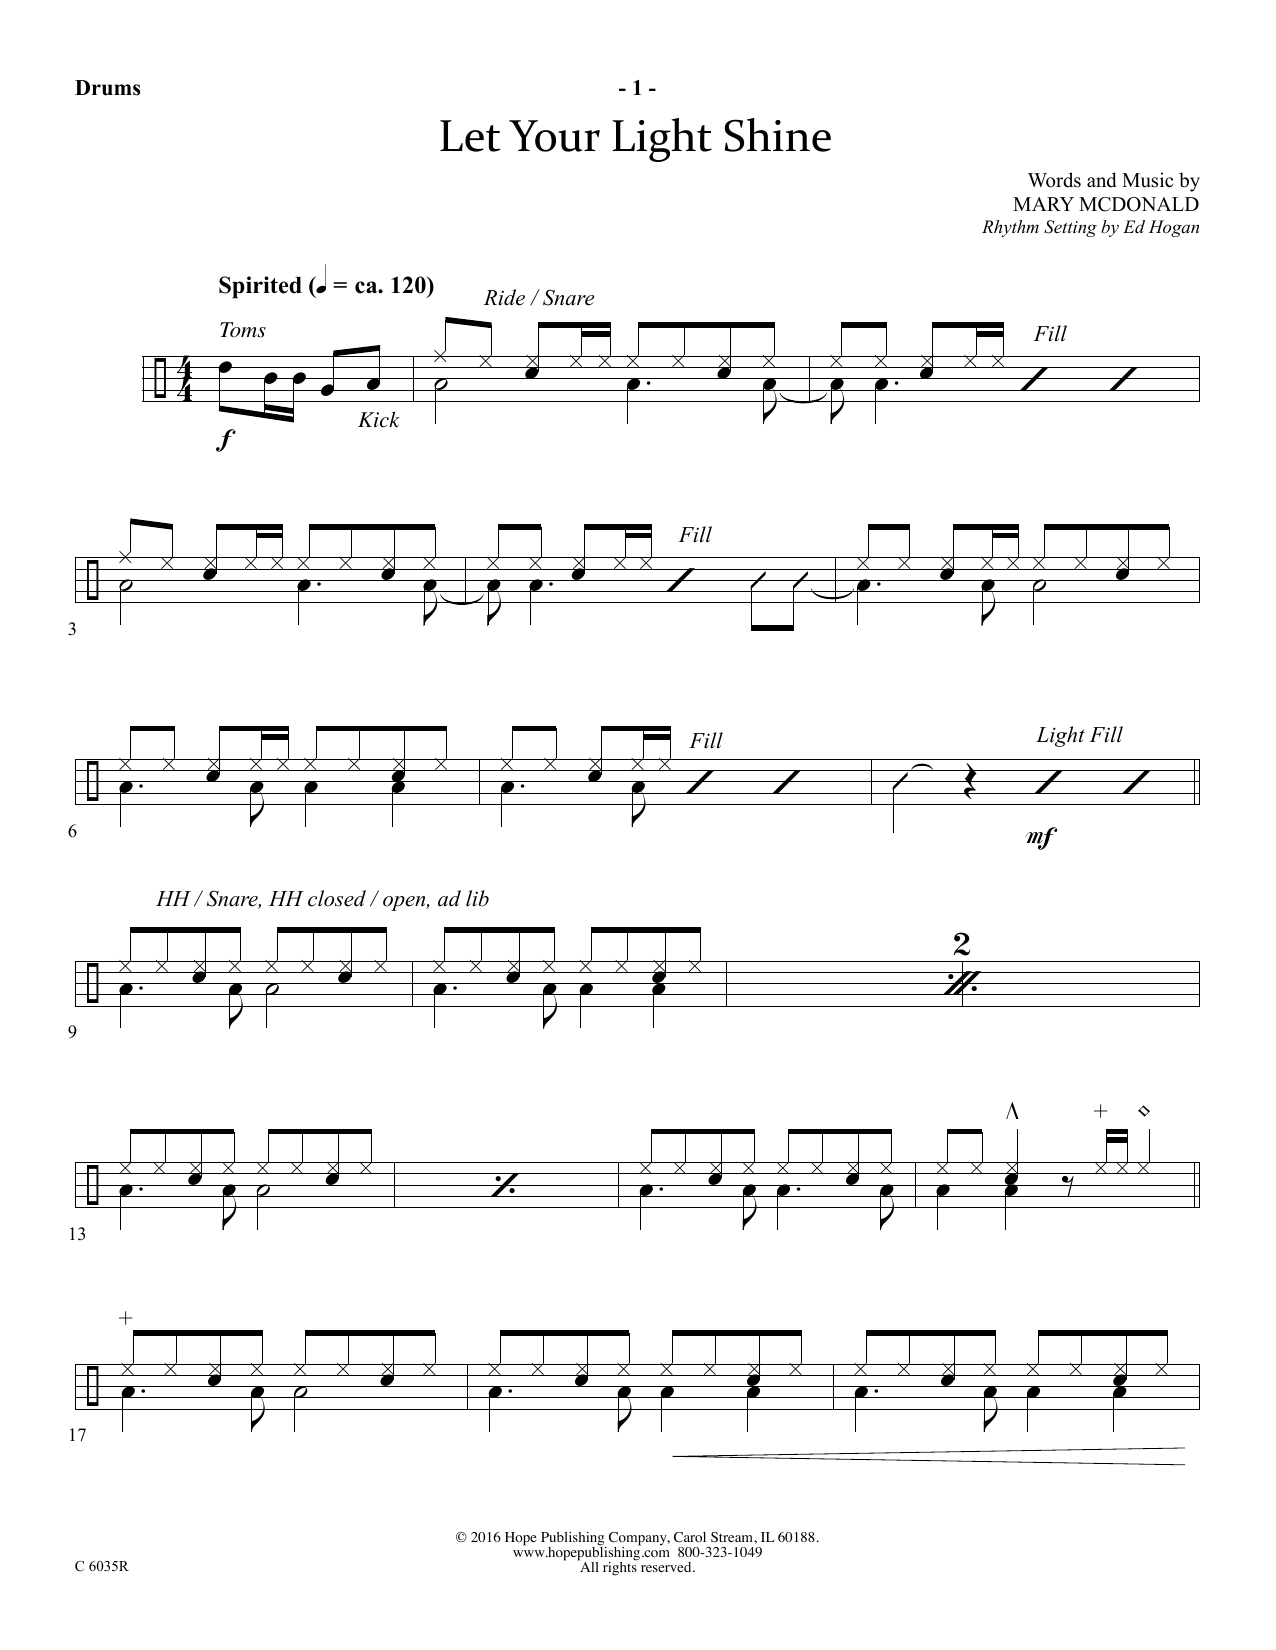 Download Mary McDonald Let Your Light Shine - Drums Sheet Music